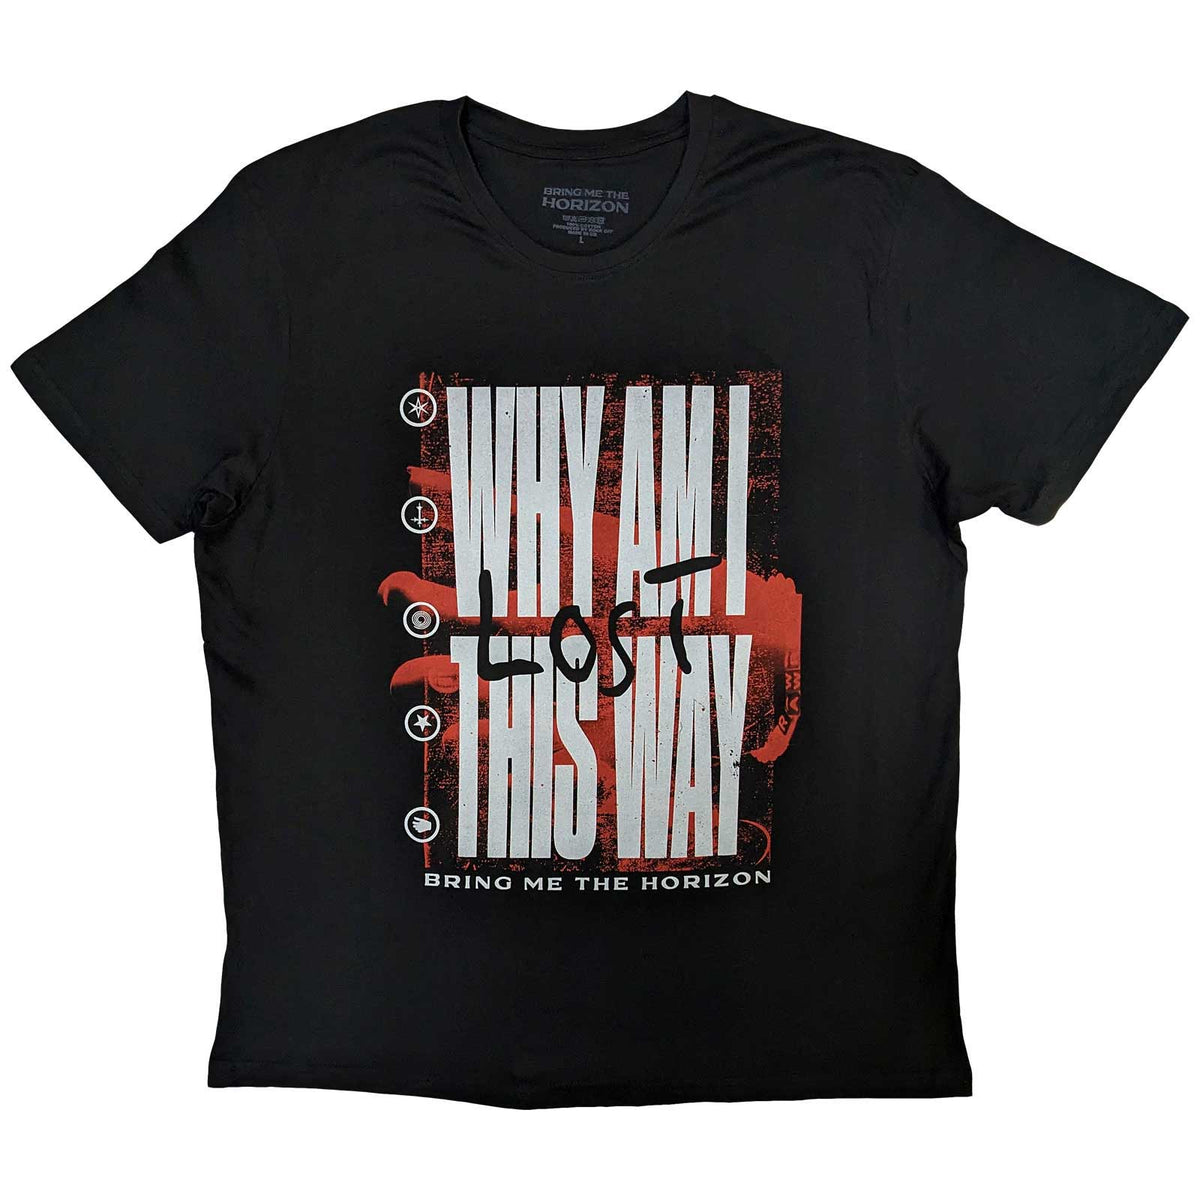 Bring Me The Horizon T-Shirt - Why - Official Licensed Design